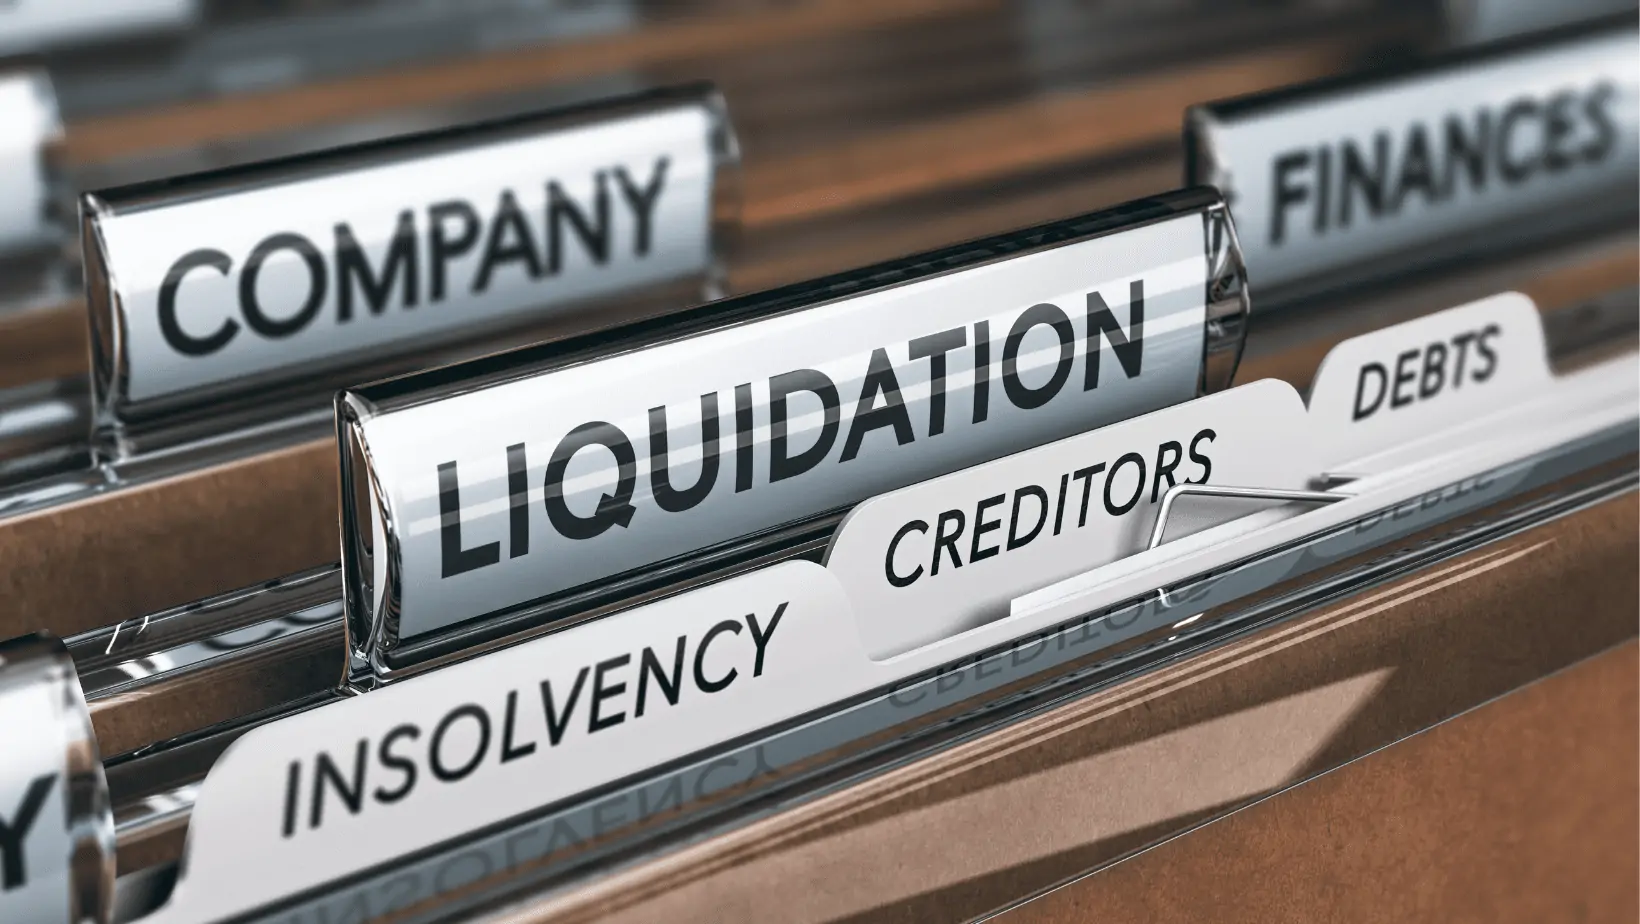 Conduit Capital Limited Faces Liquidation Applications: Shareholder Concerns and Company Assurance